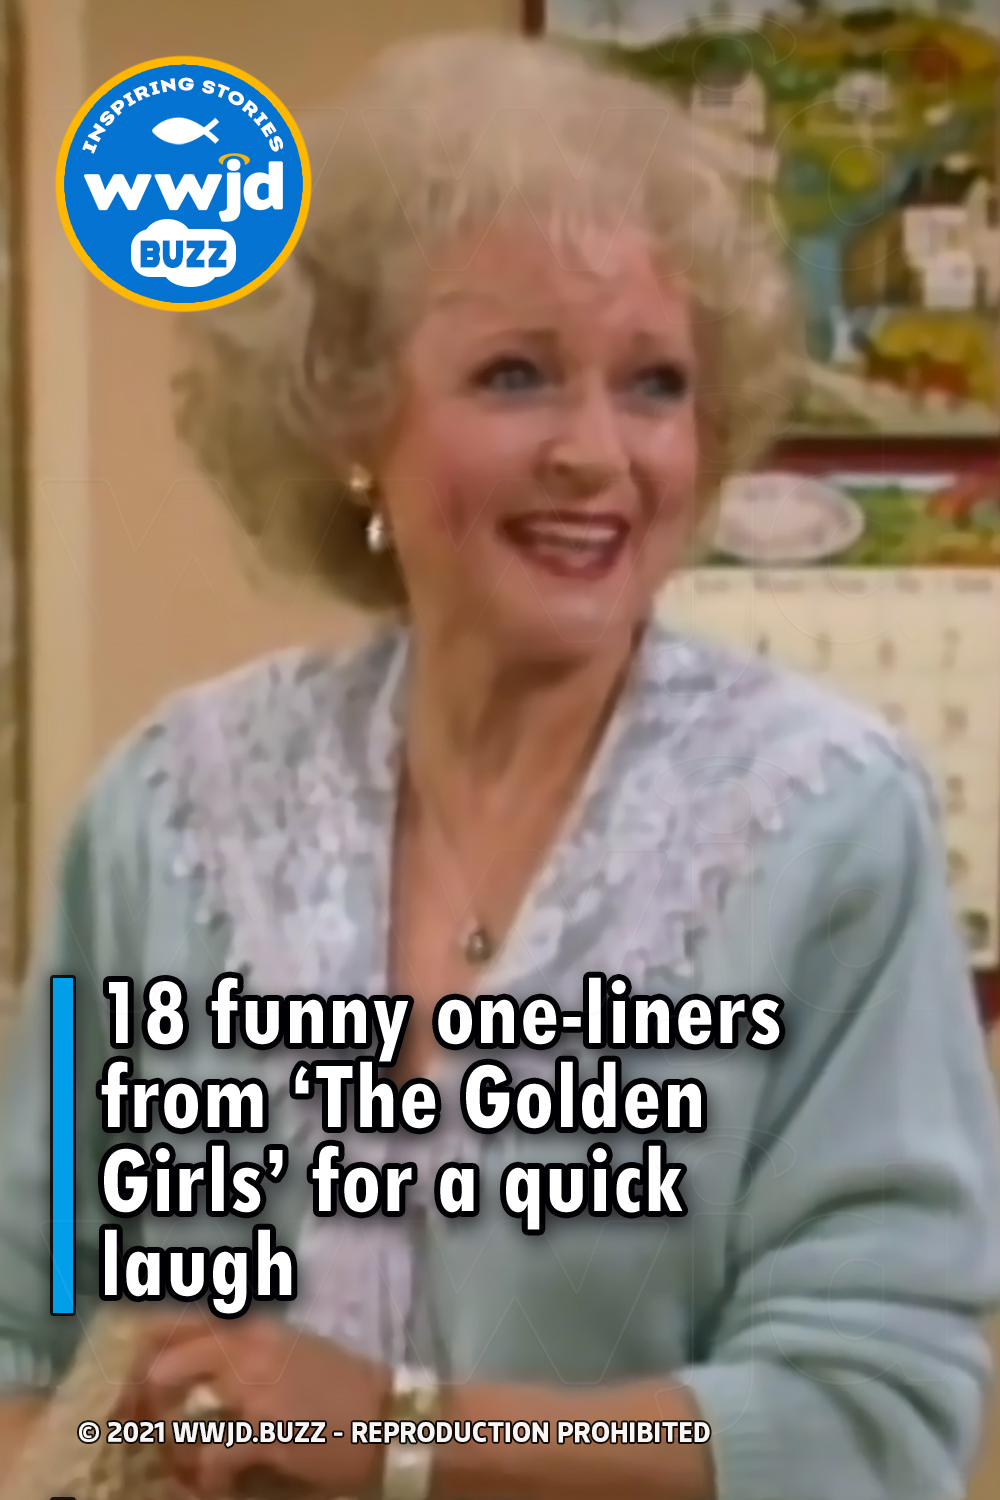 18 funny one-liners from ‘The Golden Girls’ for a quick laugh